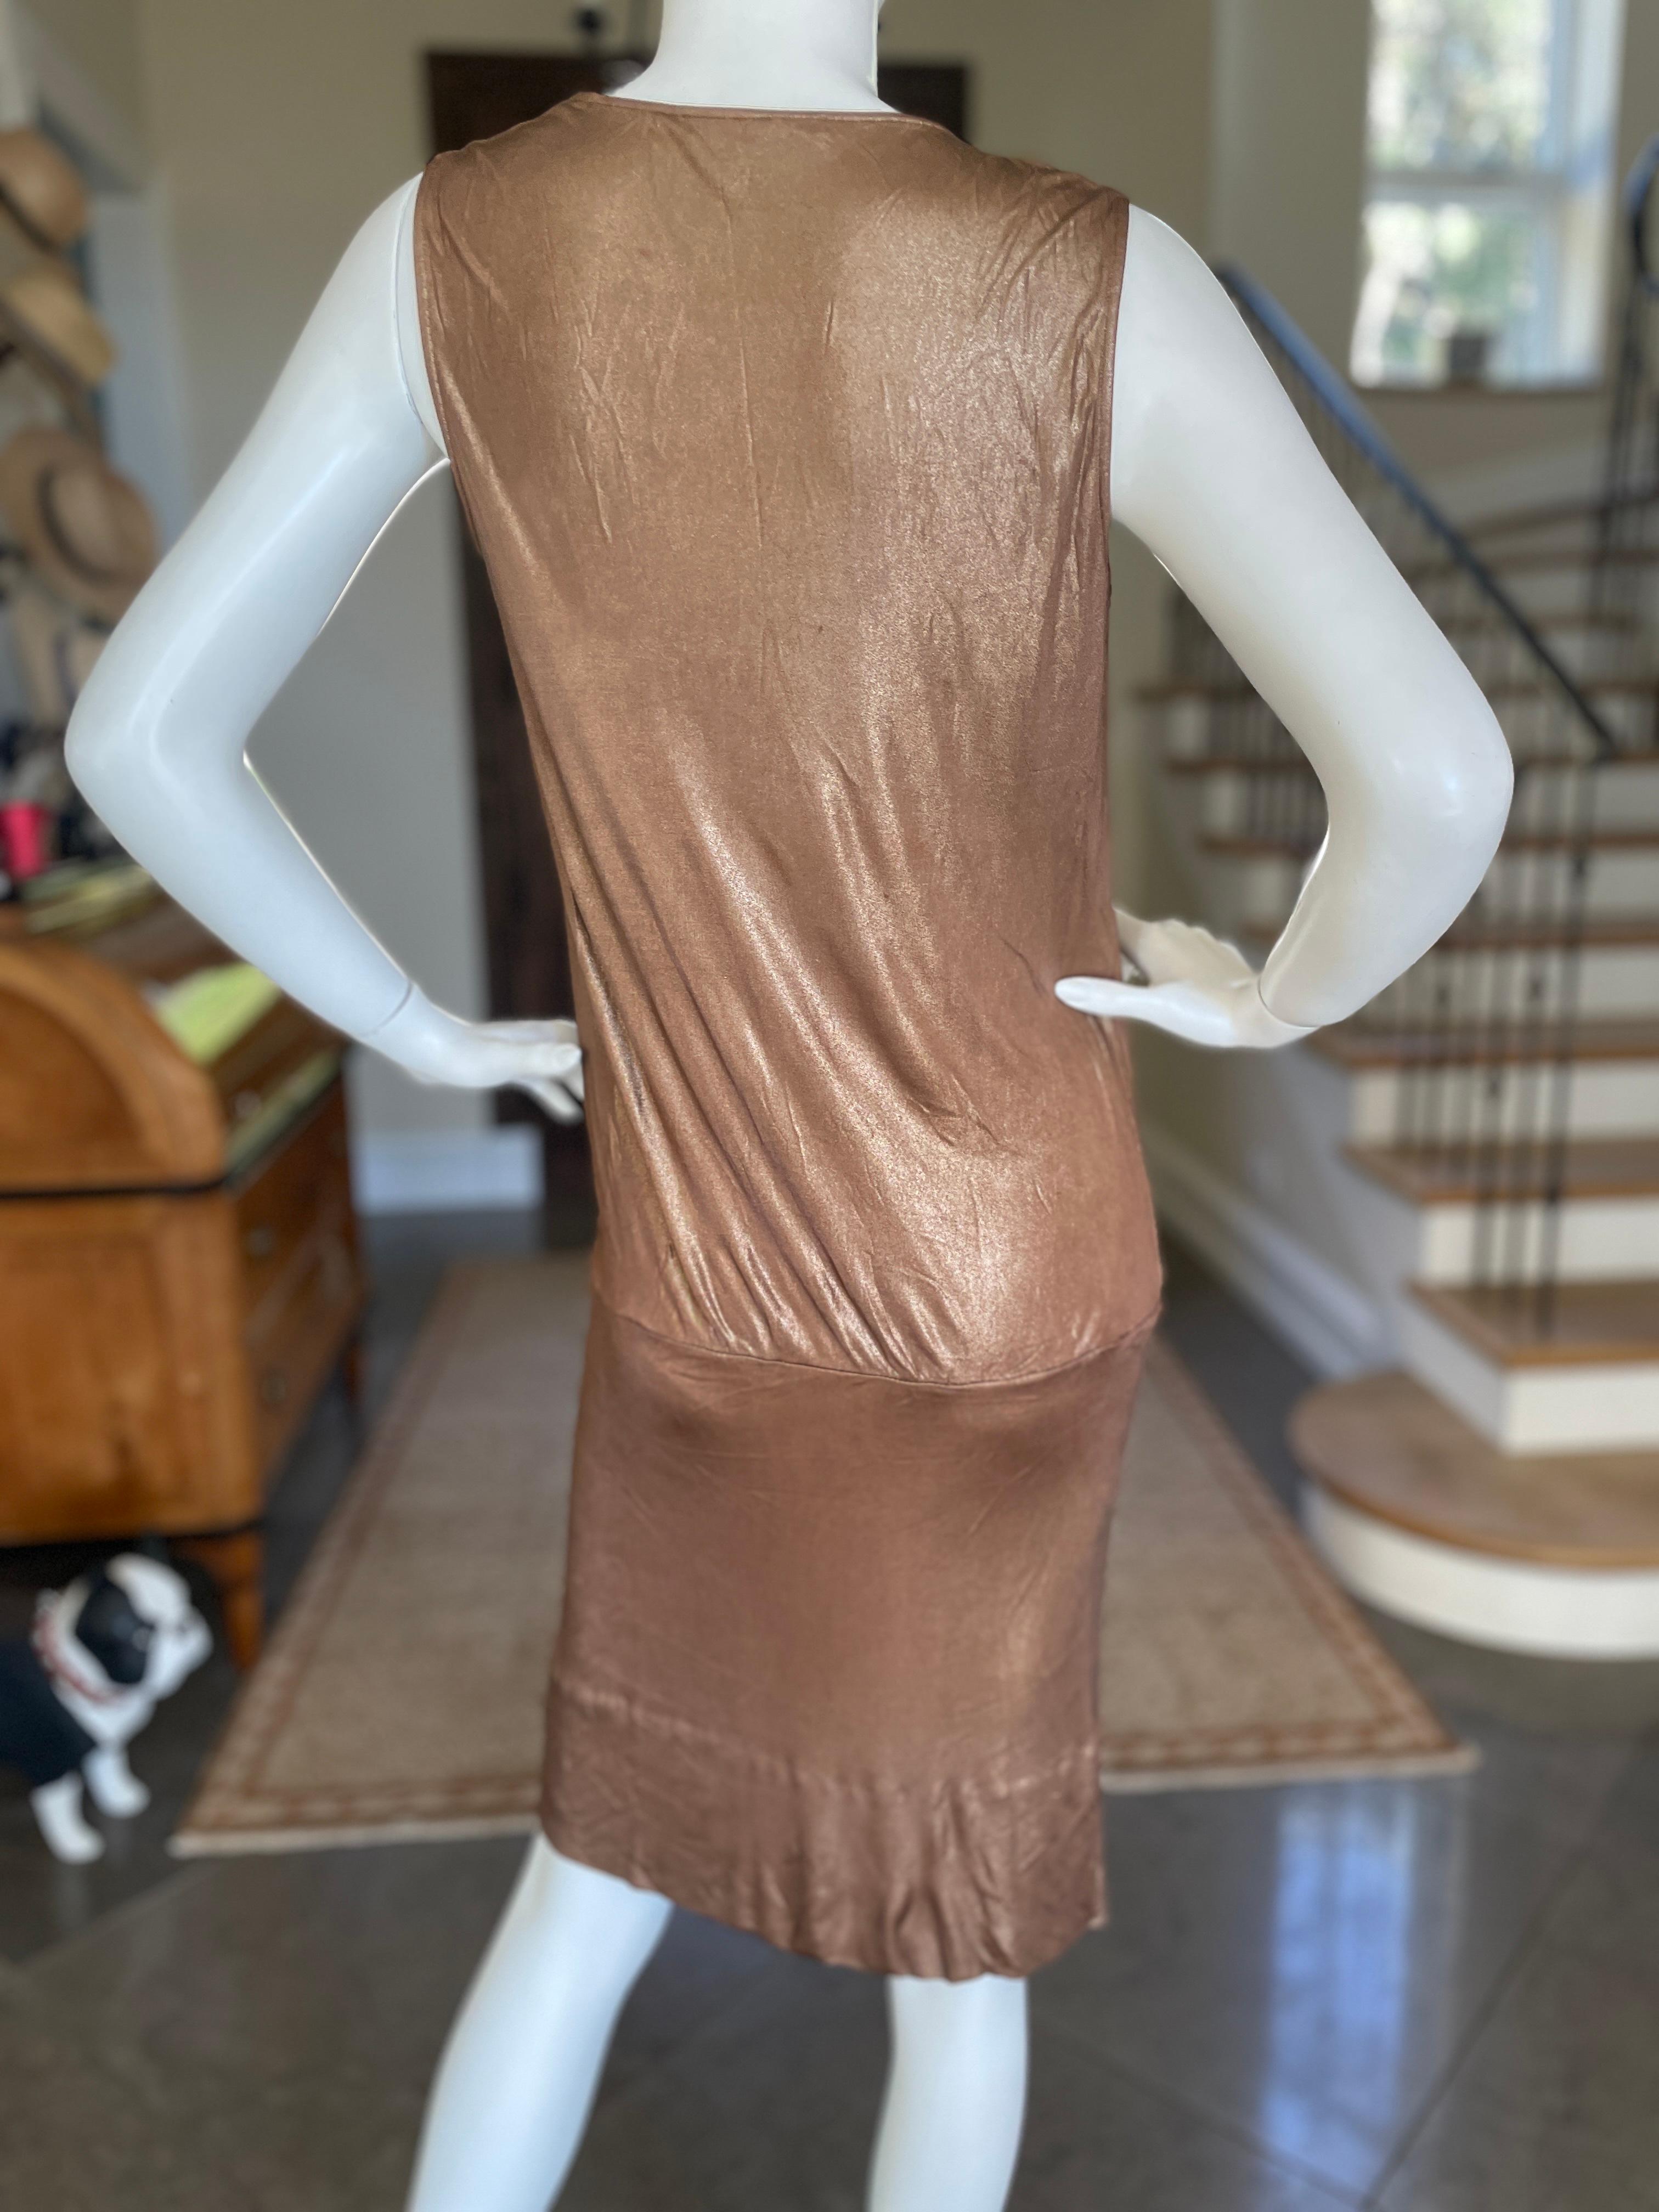 Gucci by Tom Ford Metallic Bronze Draped Cocktail Dress  In Good Condition For Sale In Cloverdale, CA